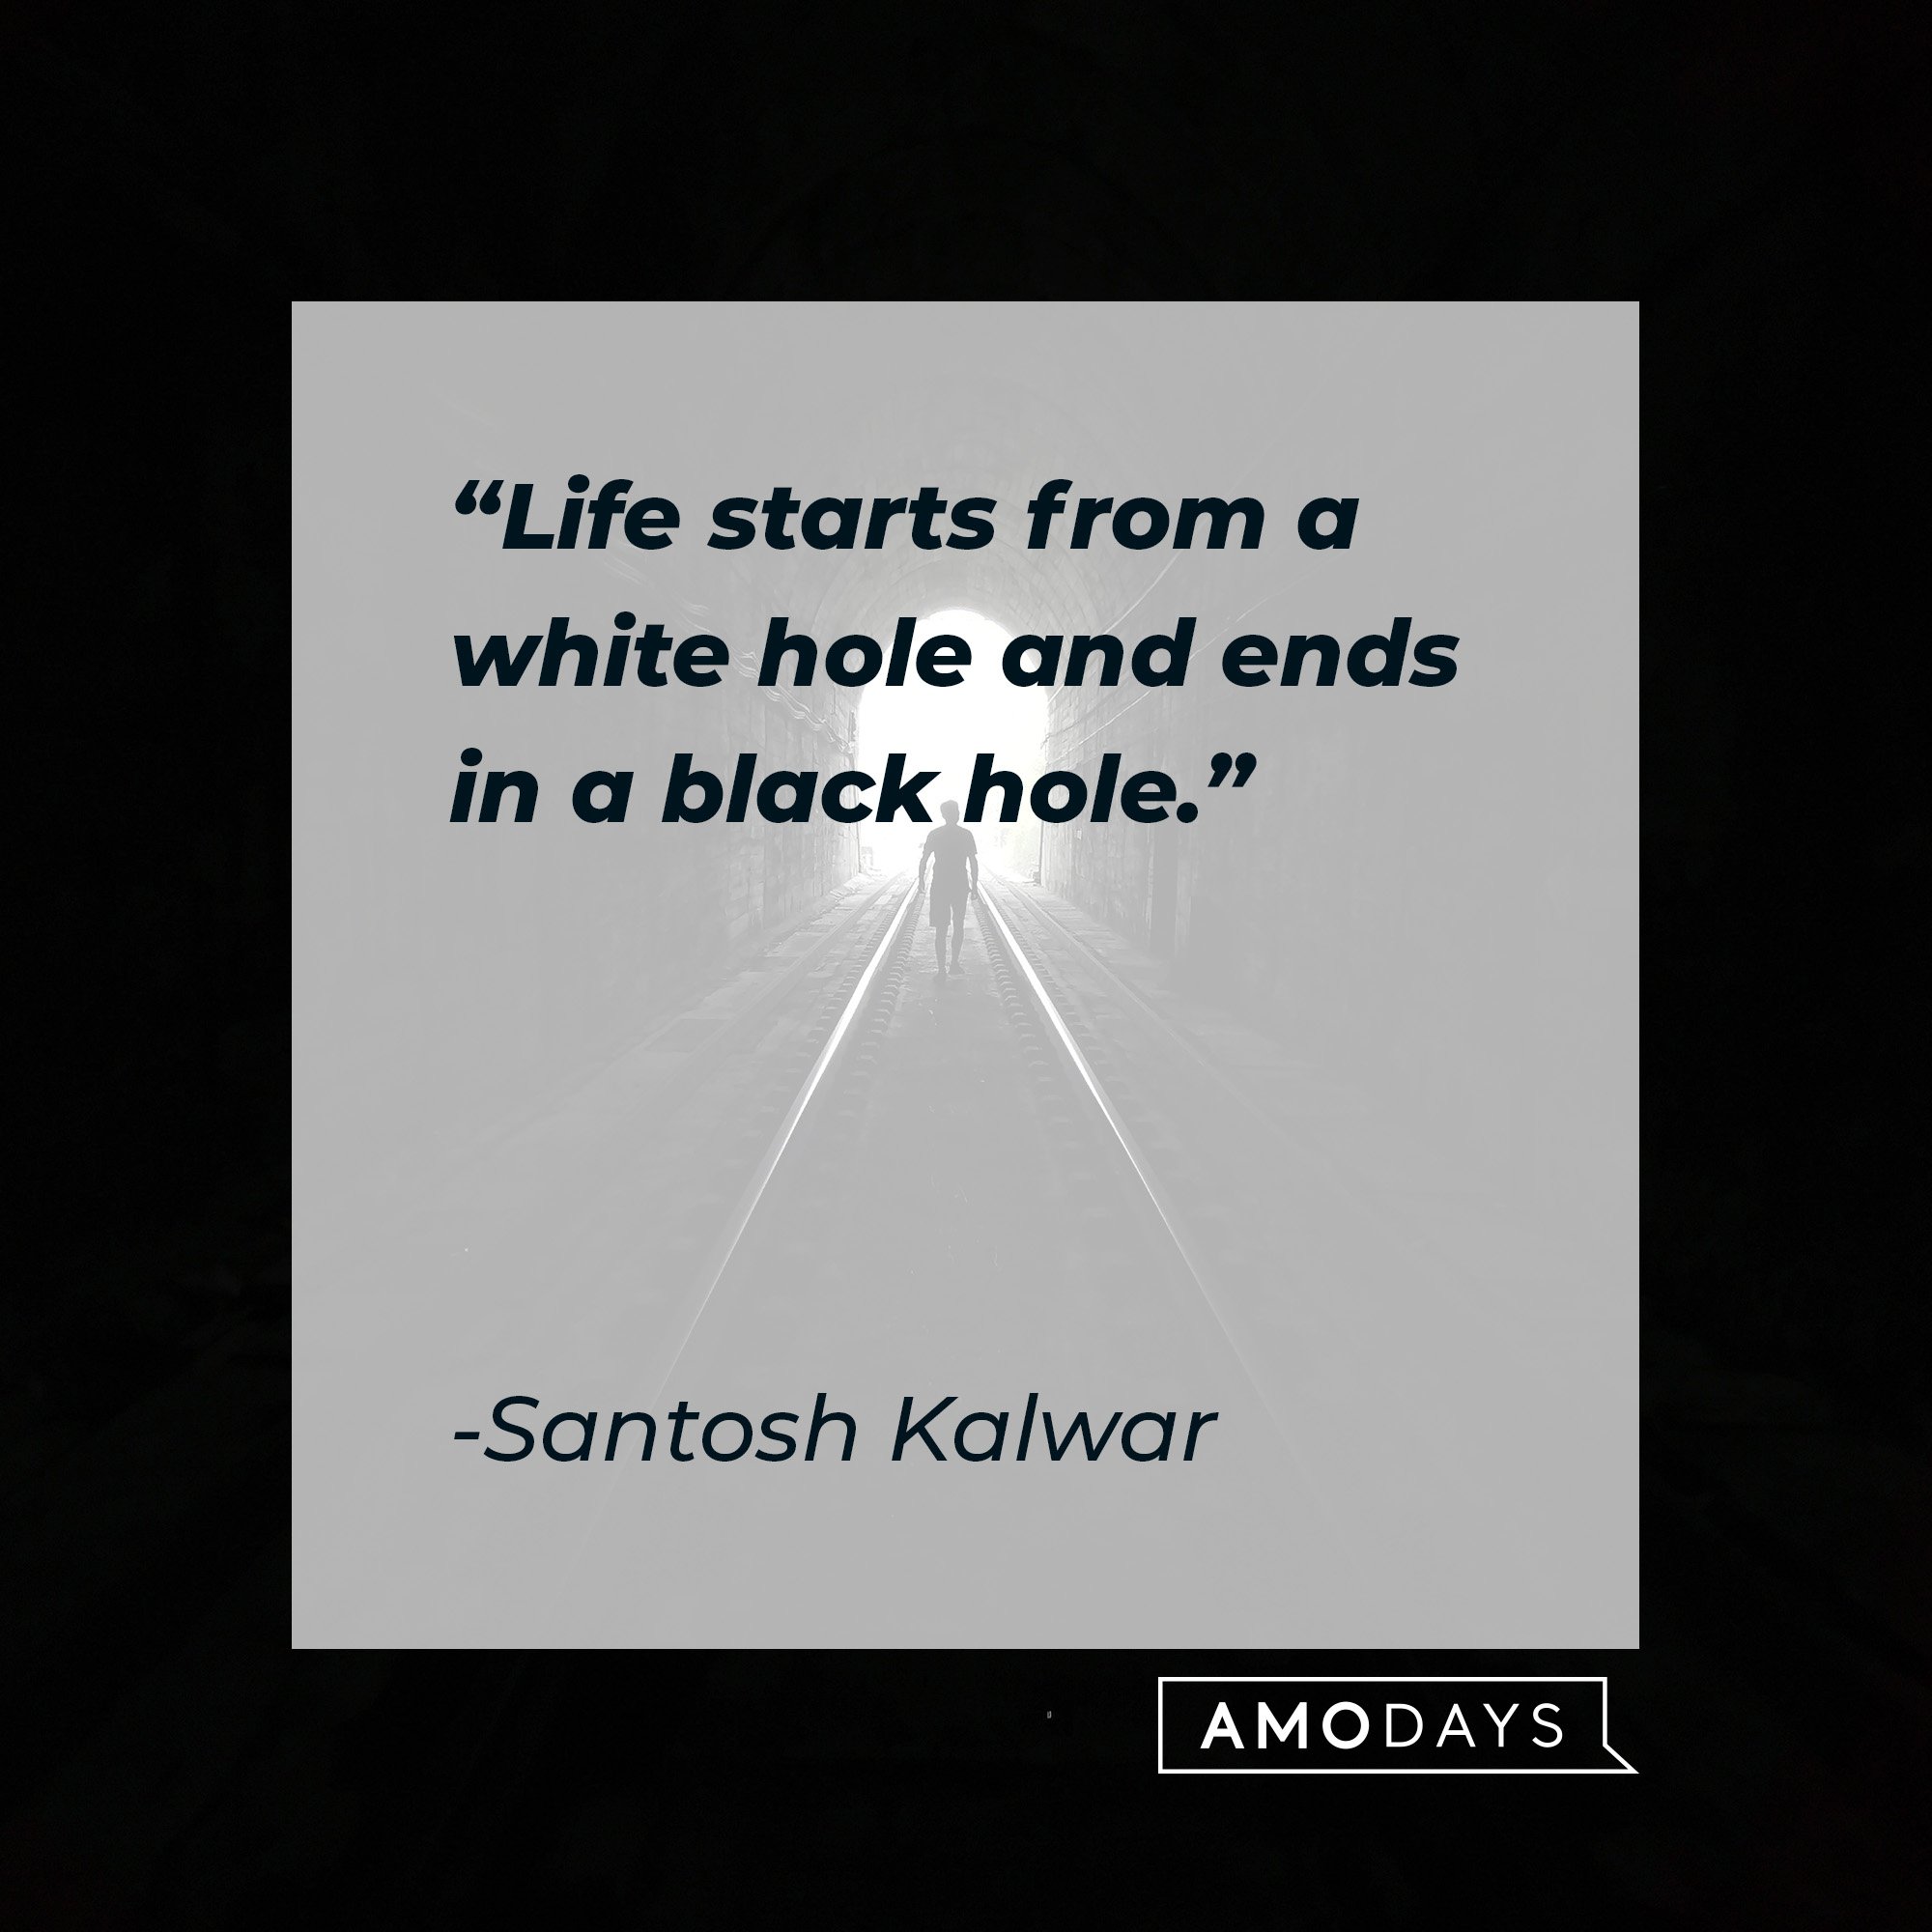 Santosh Kalwar’s quote: "Life starts from a white hole and ends in a black hole." | Image: AmoDays 